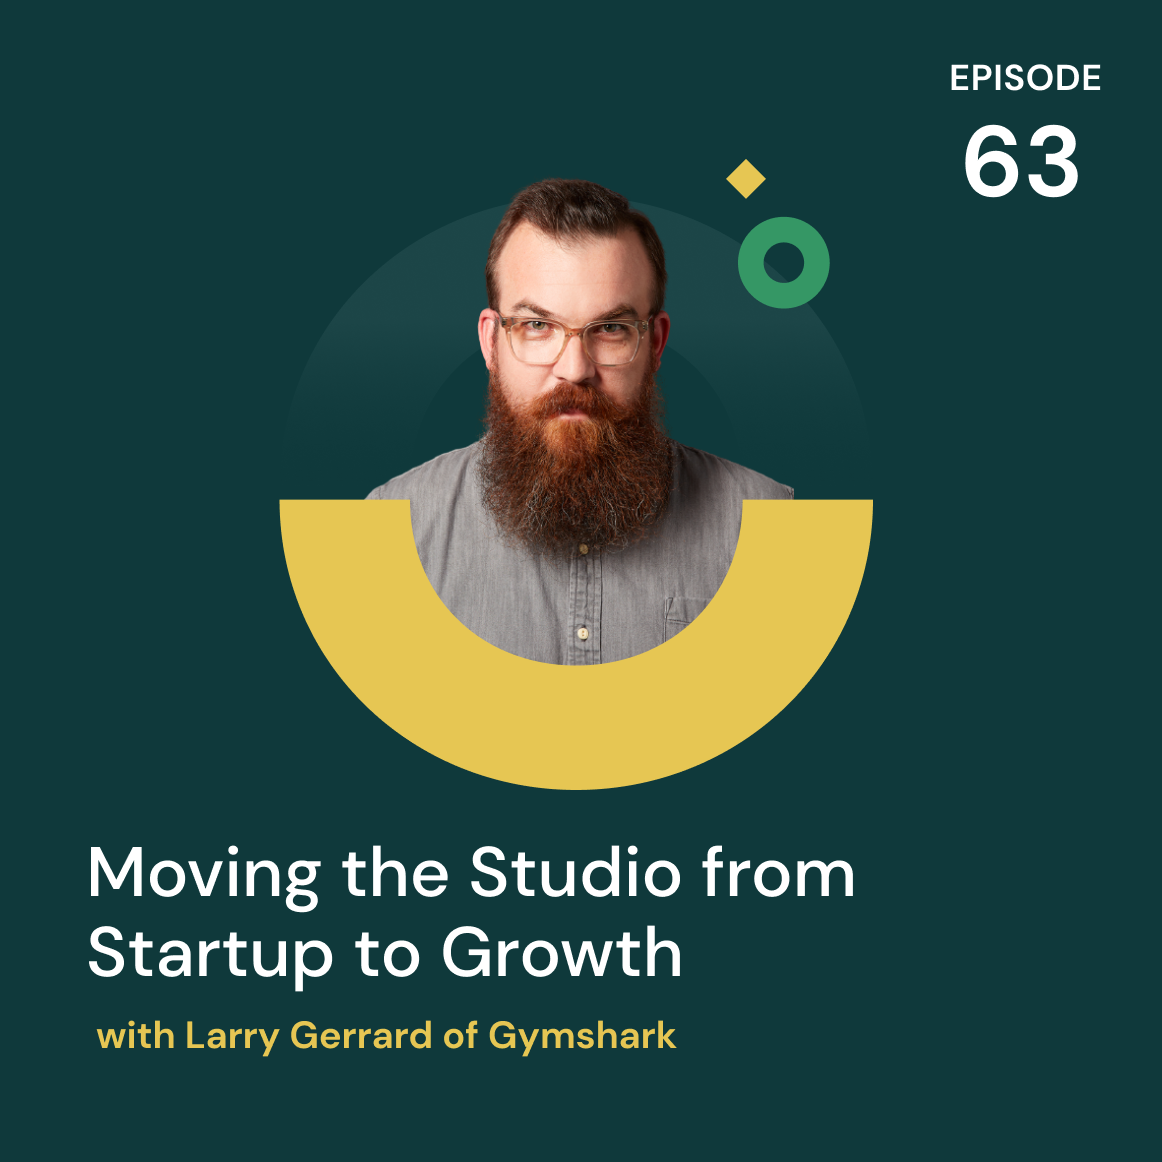 Moving the Studio from Startup to Growth with Larry Gerrard of